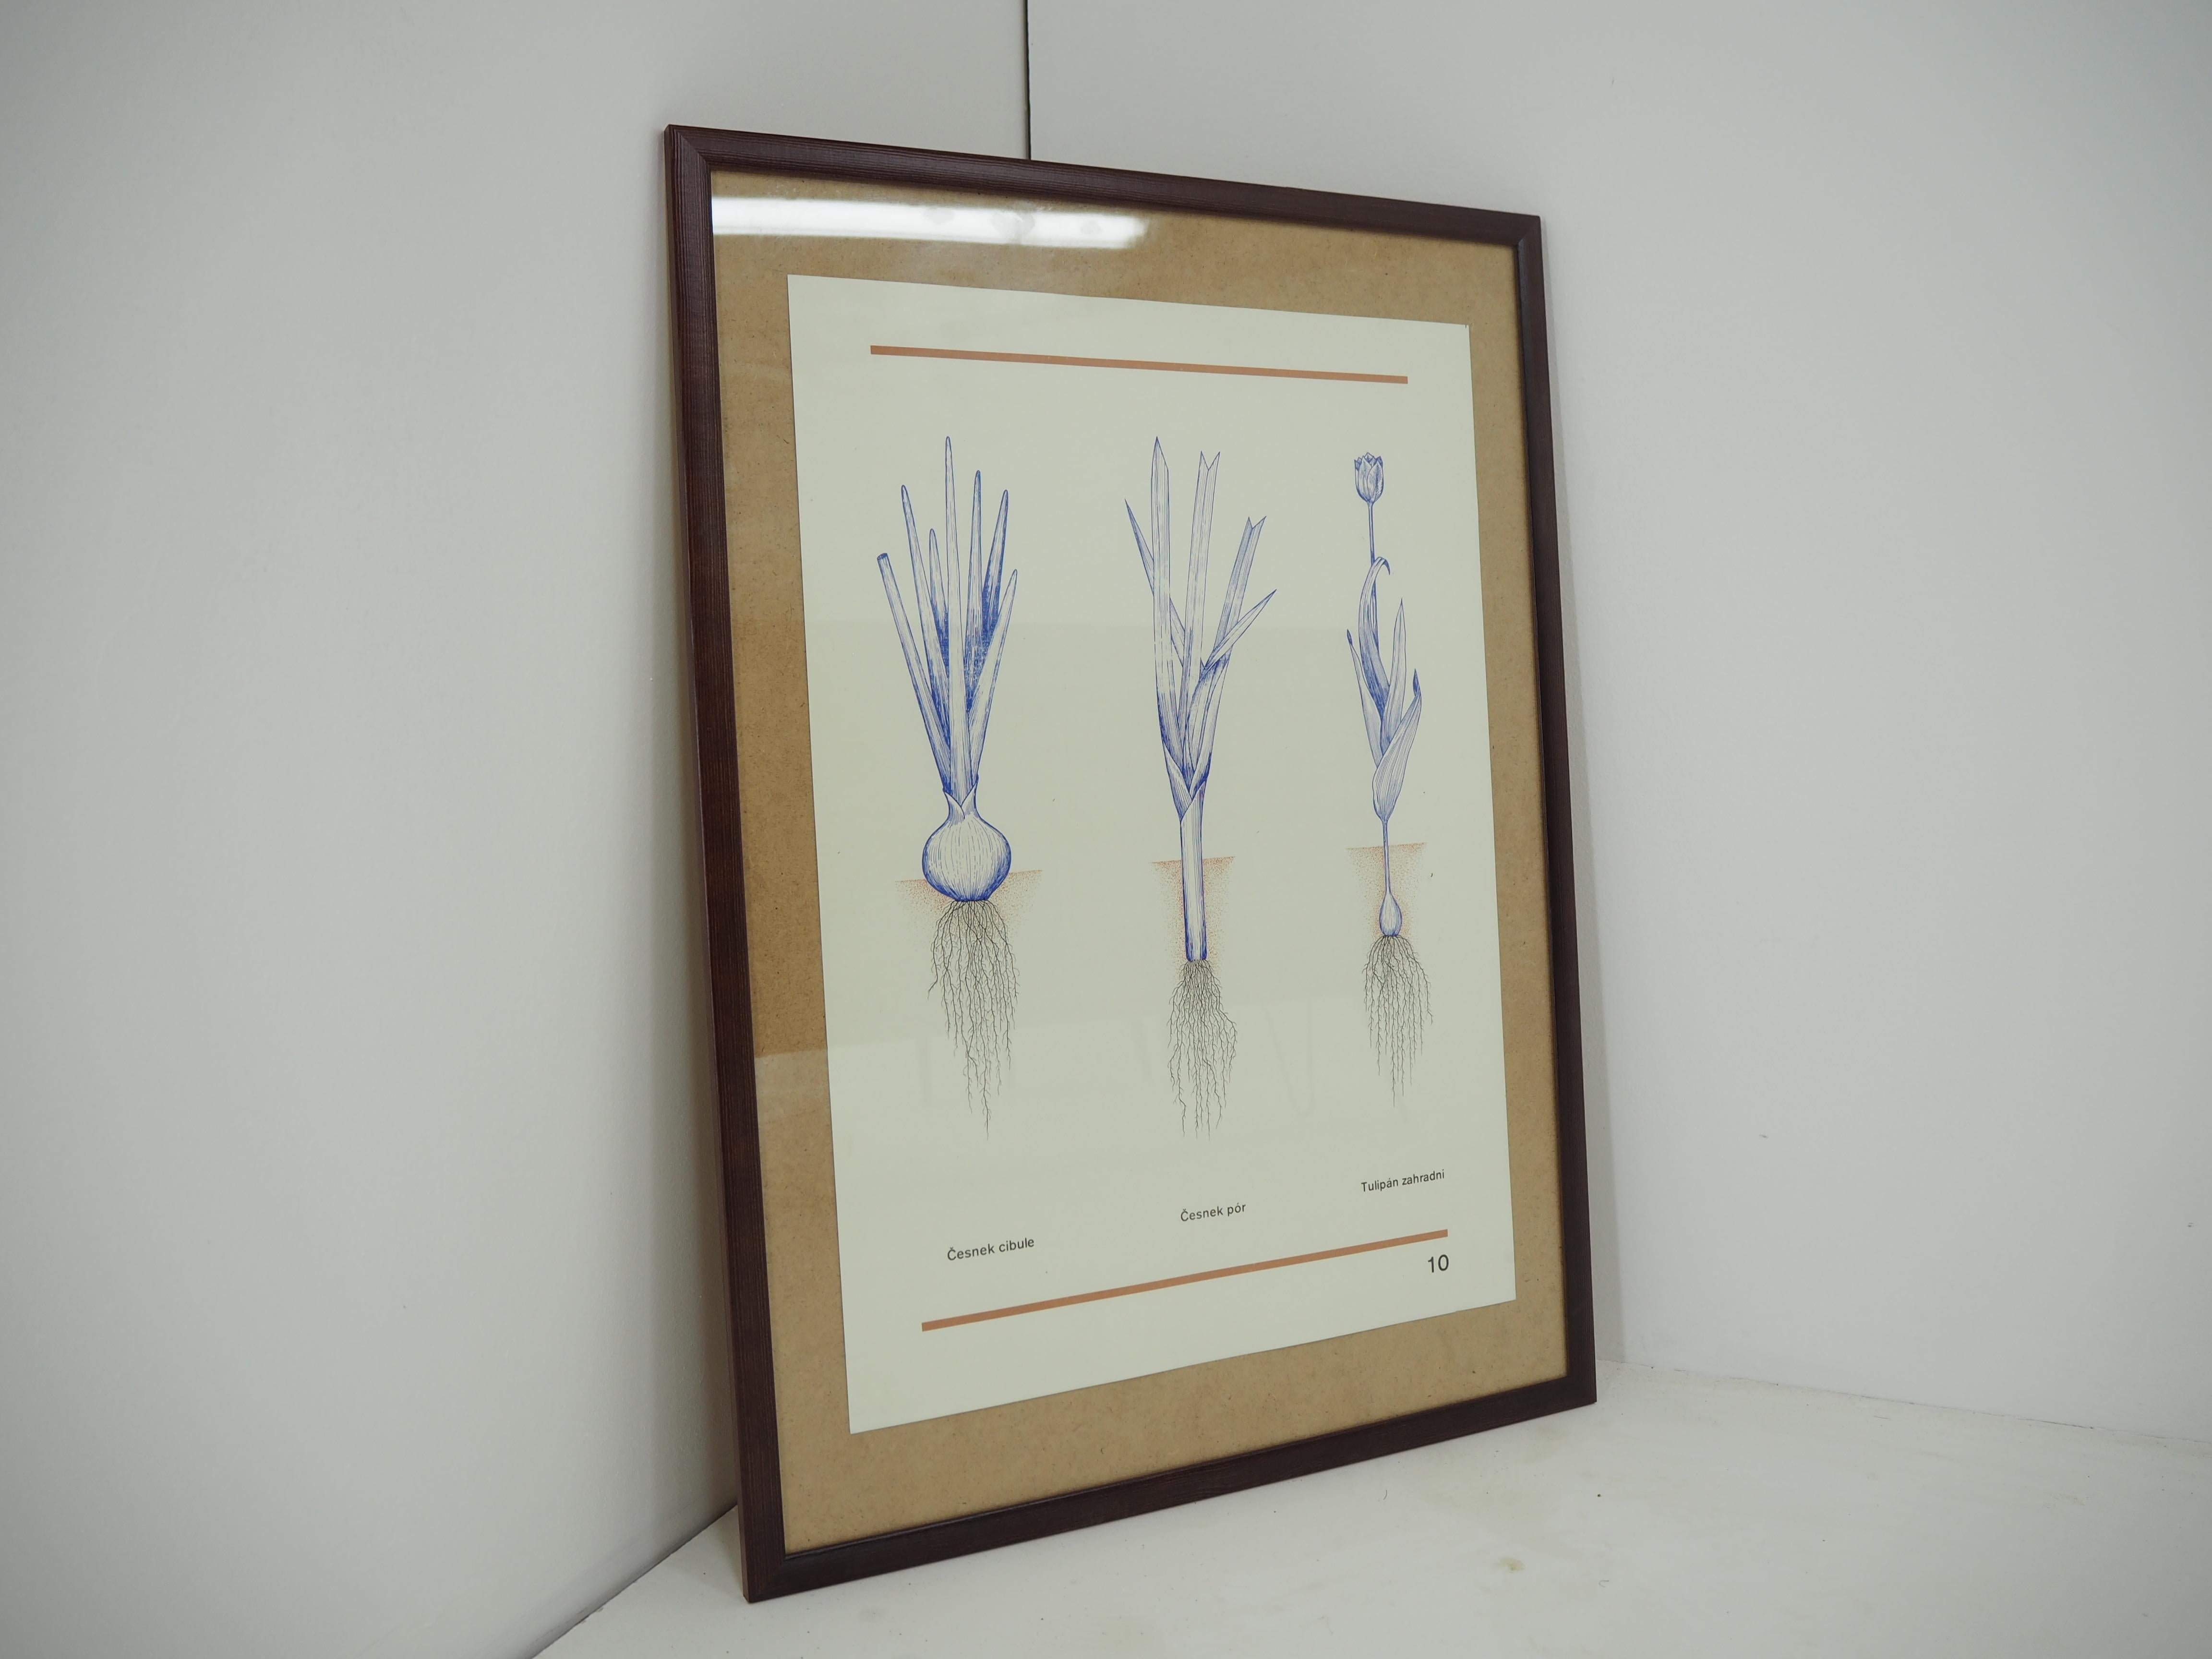 In new frame
Poster from midcentury 
In original condition.